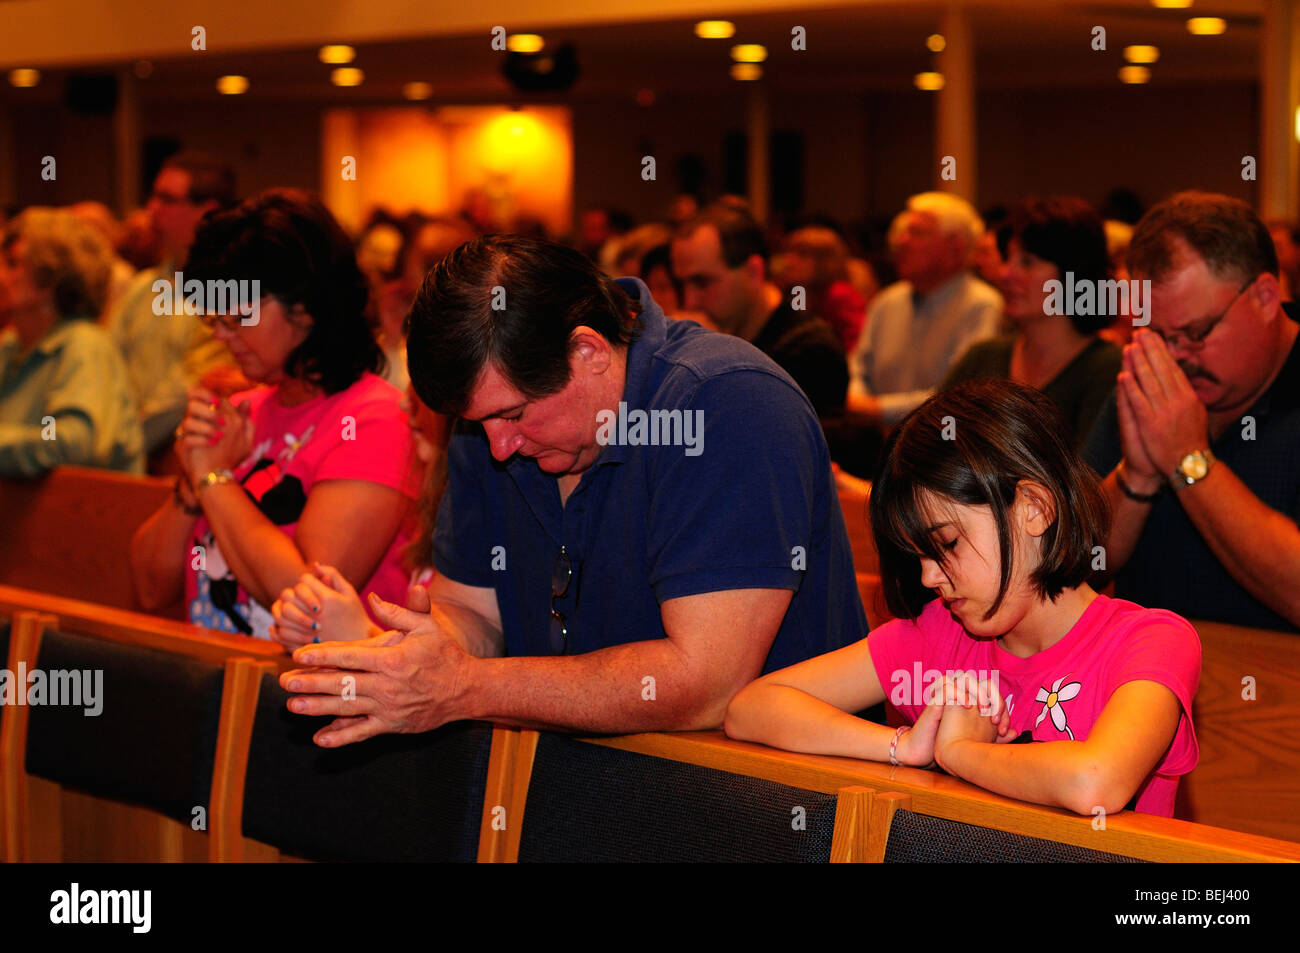 A family prays together at a Catholic church. Stock Photo